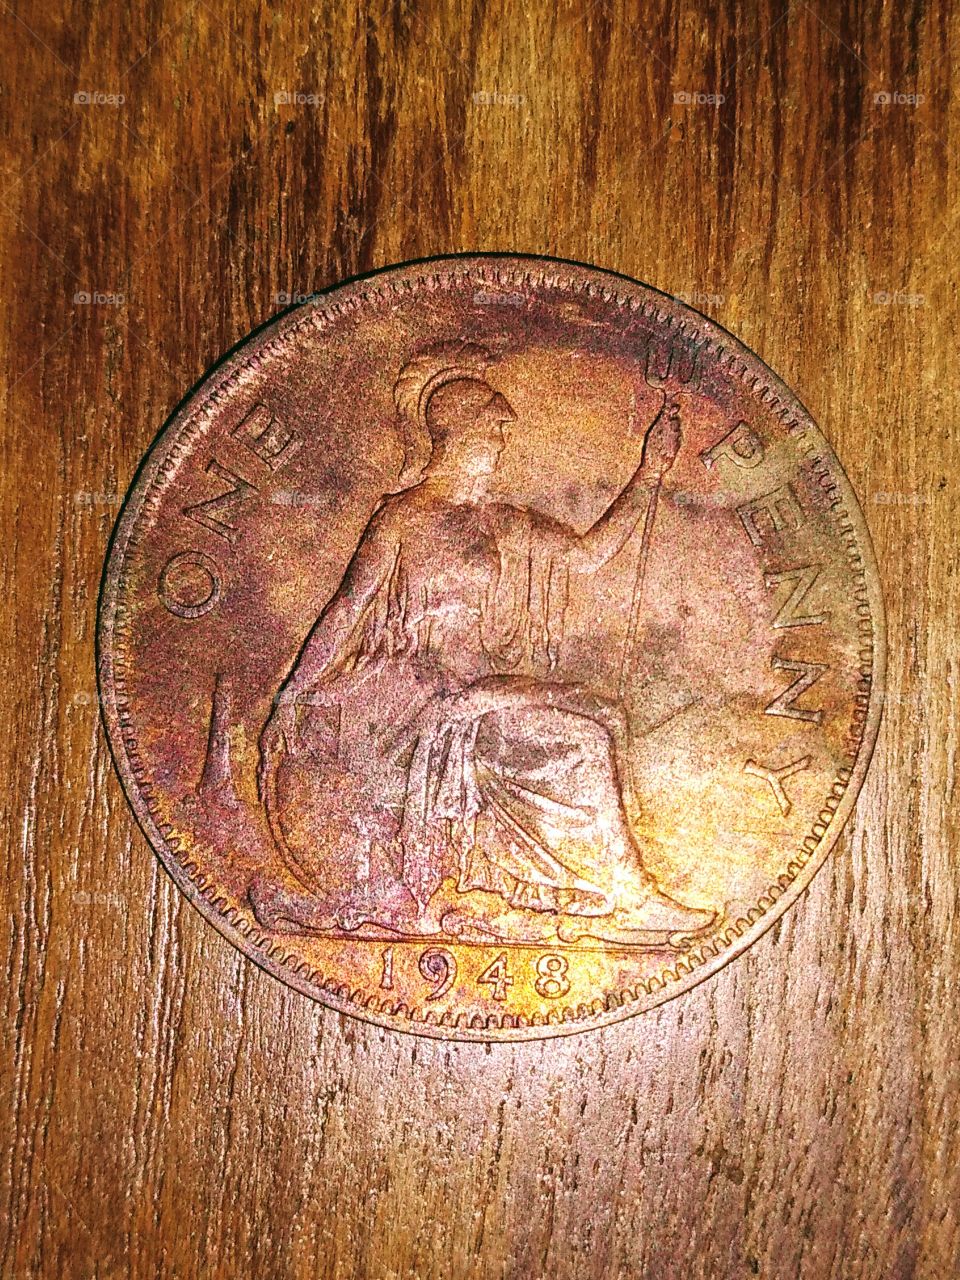 a 1948 one penny coin